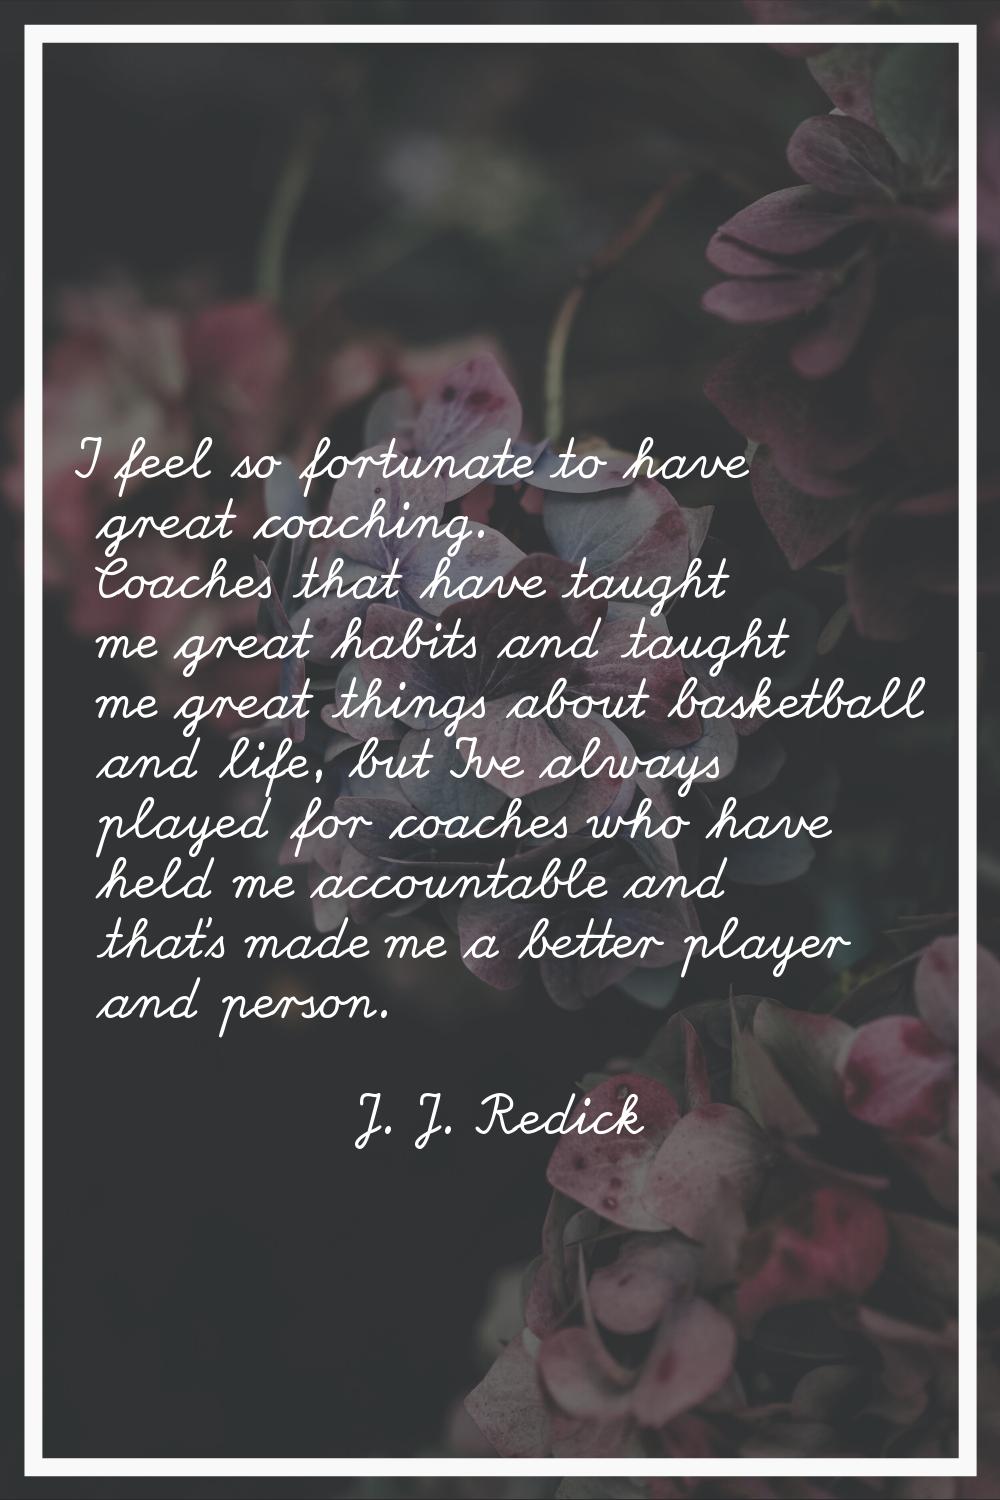 I feel so fortunate to have great coaching. Coaches that have taught me great habits and taught me 